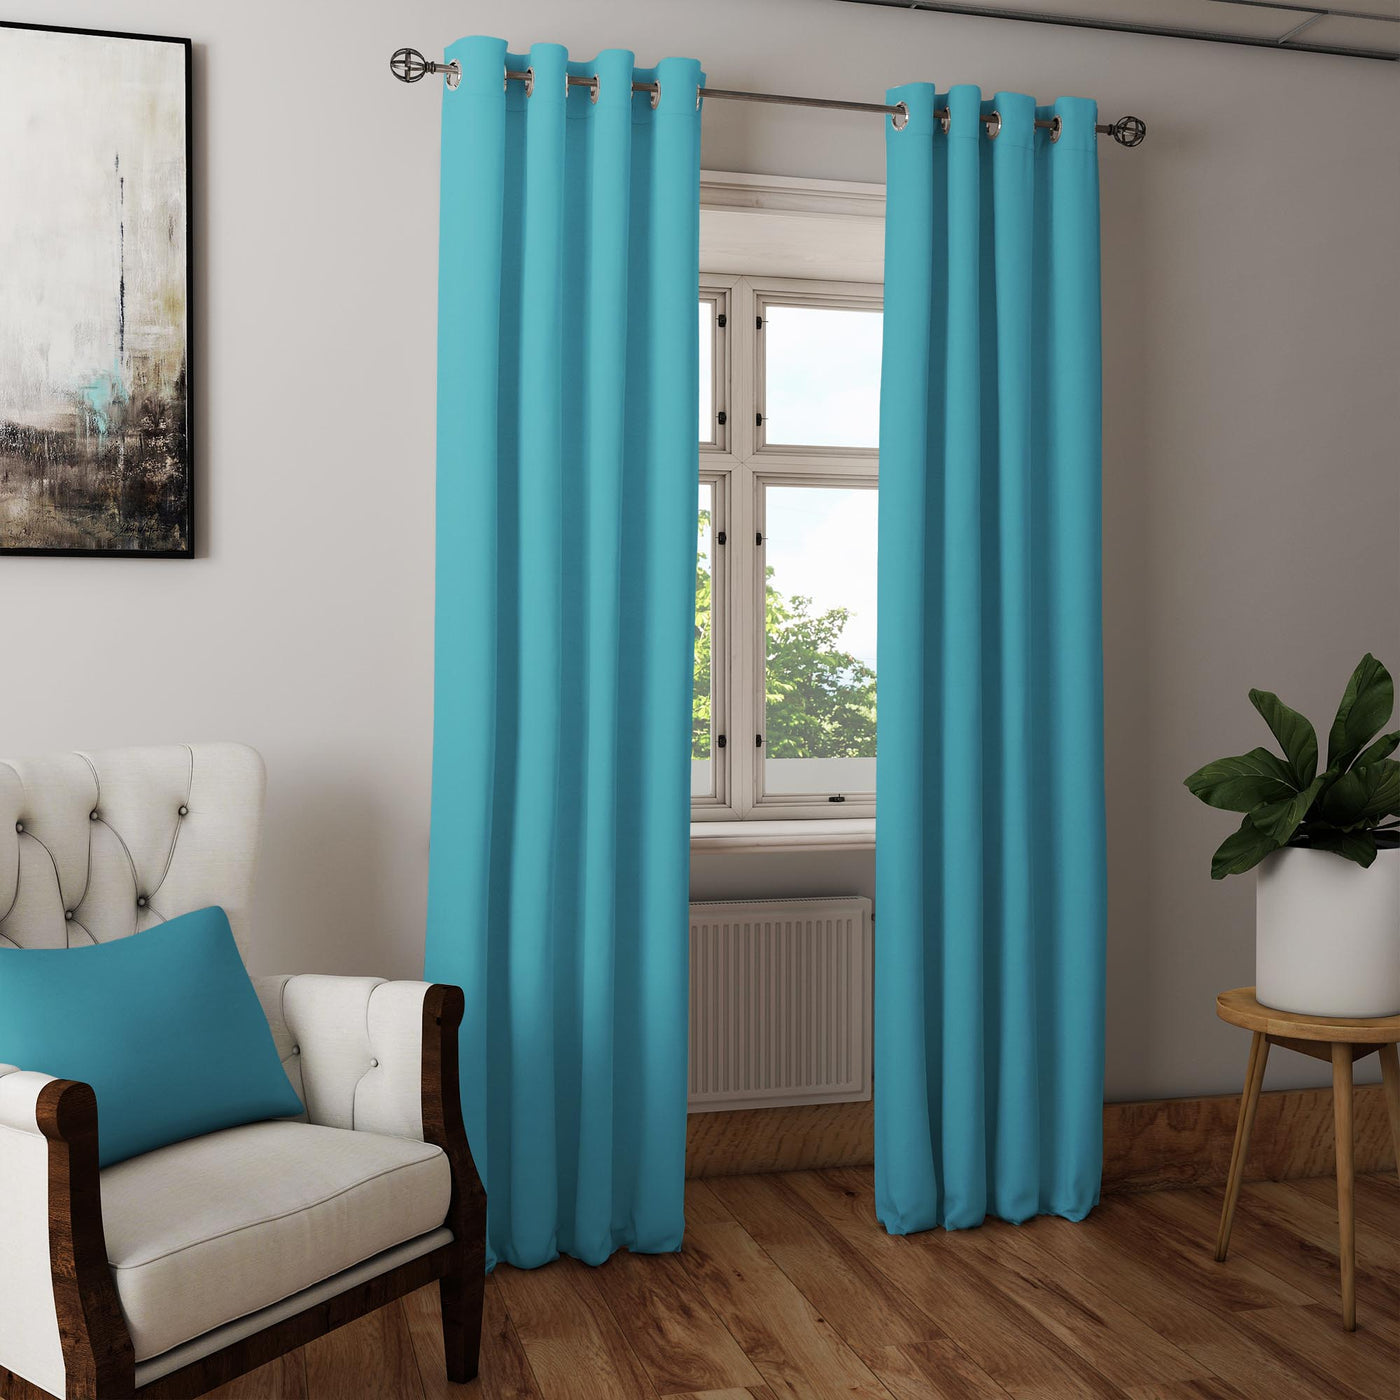 Turquoise curtain